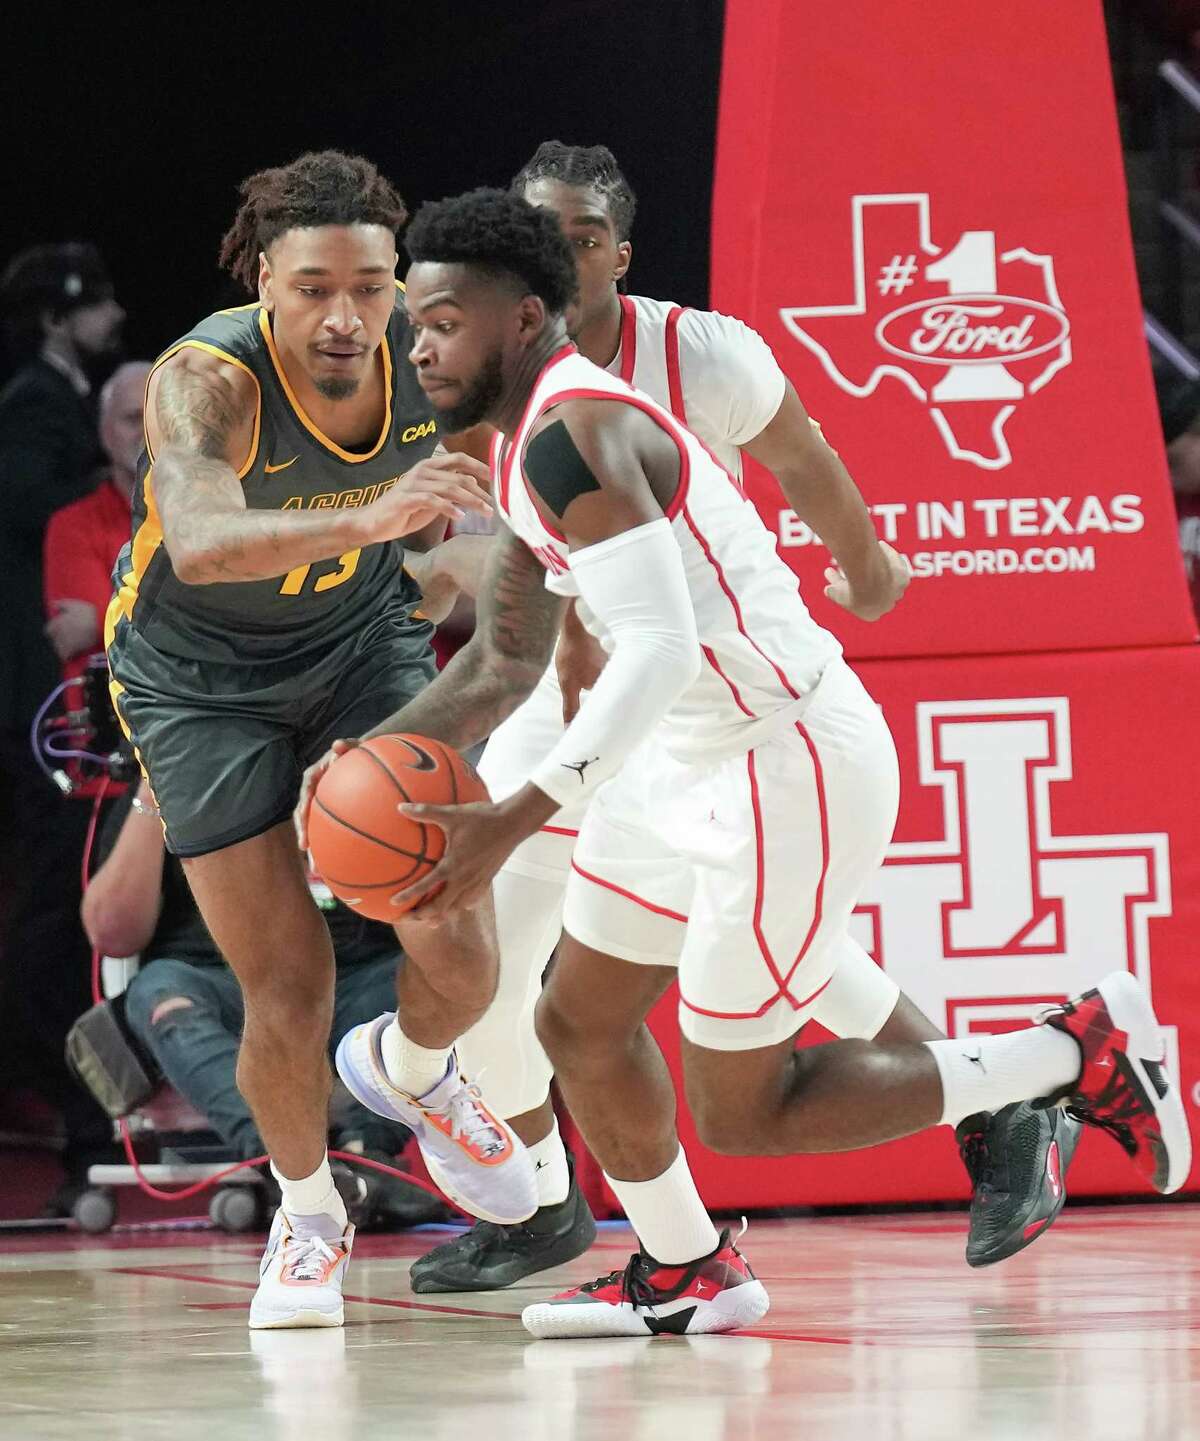 Houston Cougars guard Marcus Sasser (0) steals the ball from North Carolina A&T Aggies guard Austin Johnson (13) in the second half at the Fertitta Center on Tuesday, Dec. 13, 2022 in Houston. Houston Cougars won the game 74-46.